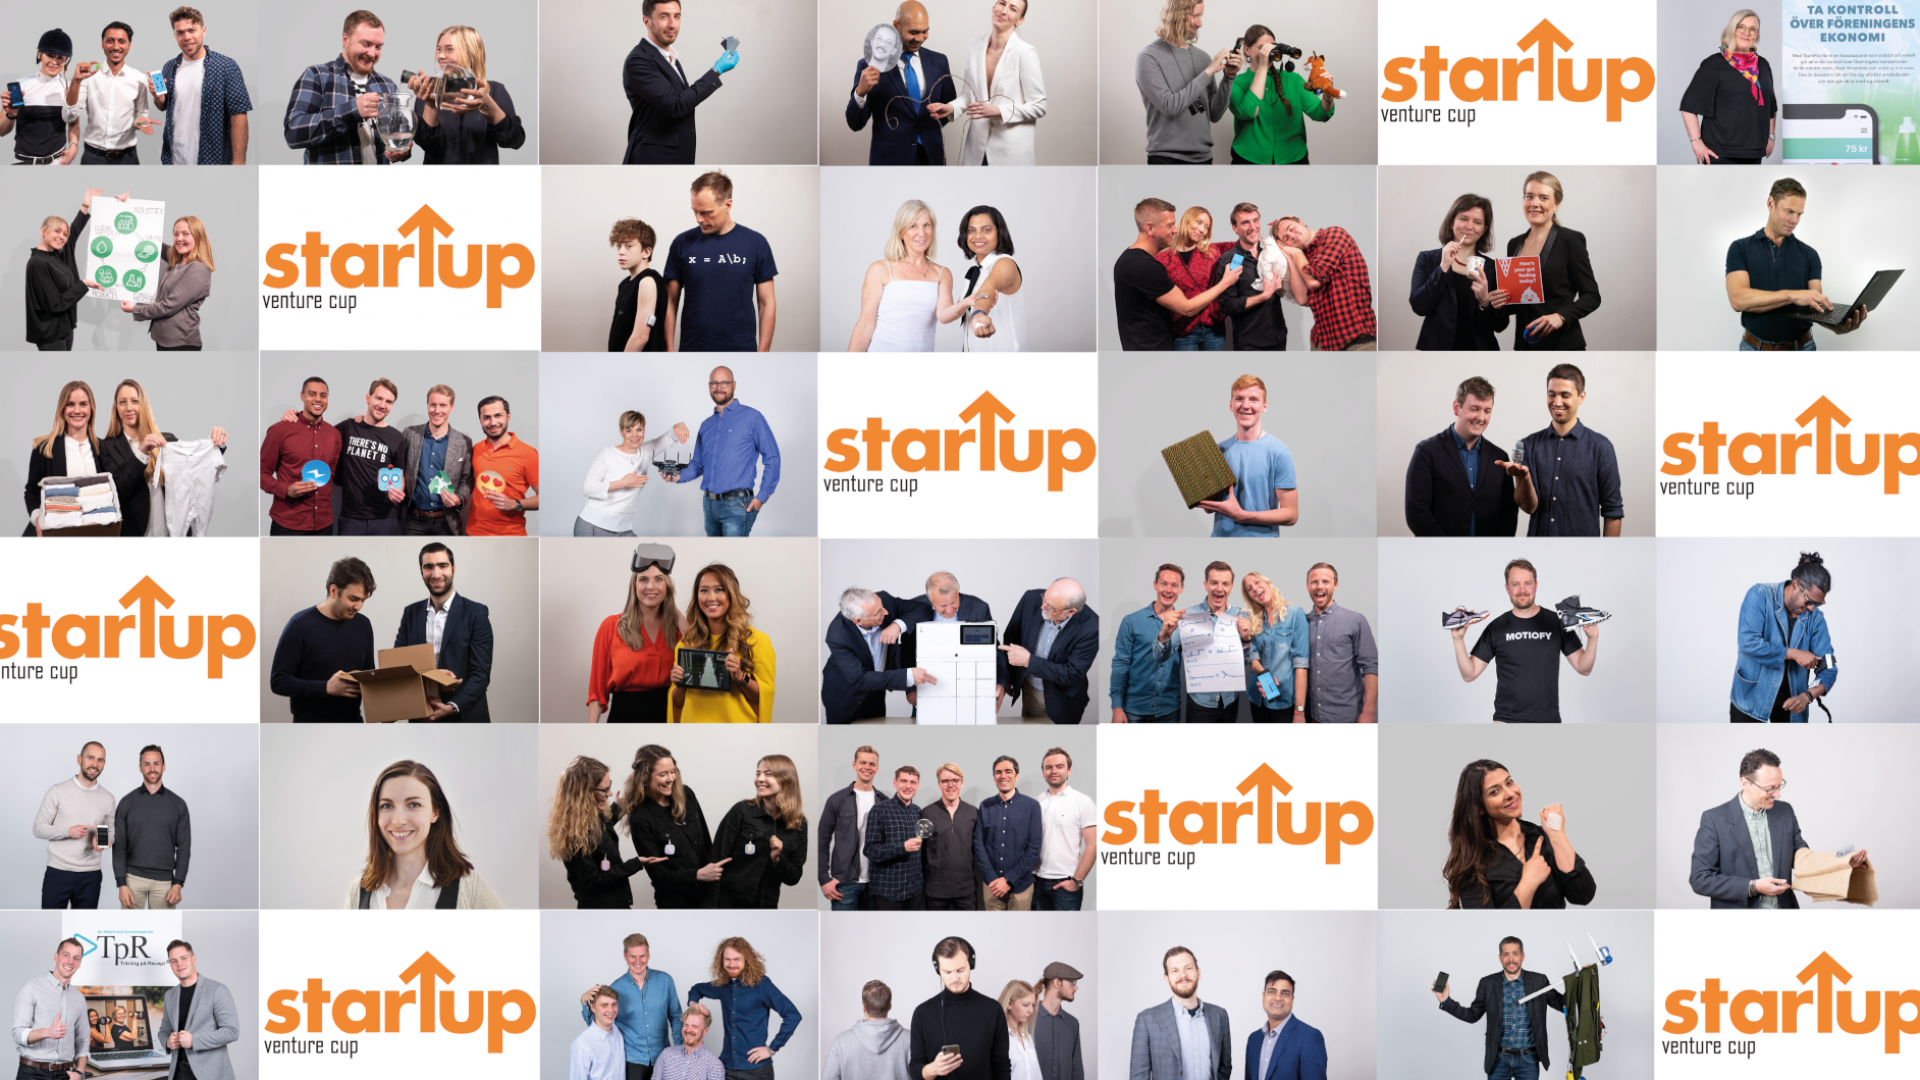 Nominated to Venture Cup Startup 2019